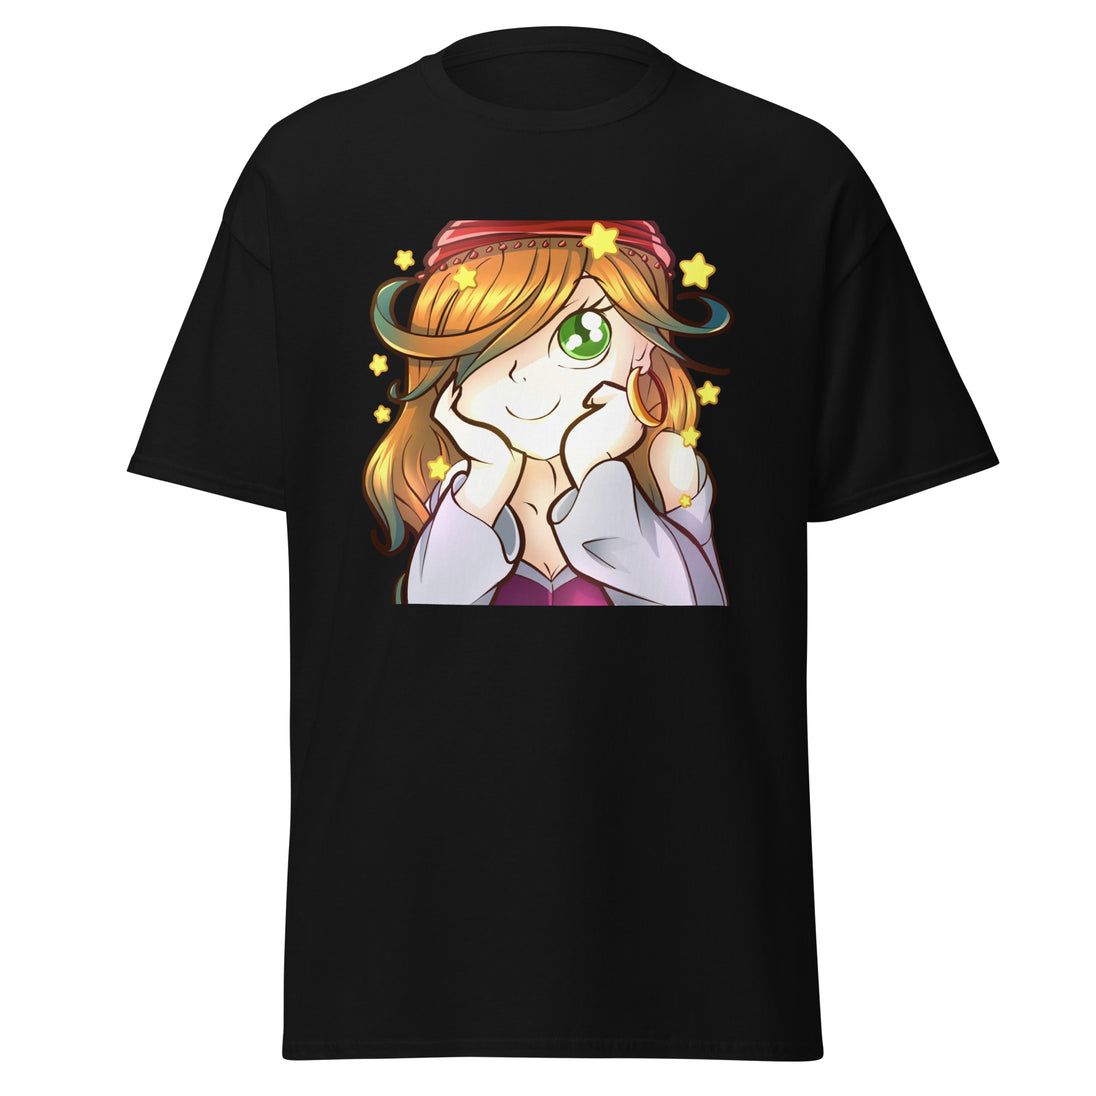 Pirate In Love Gamer/Streamer T-Shirt - Soft, Comfortable, and Unique Design